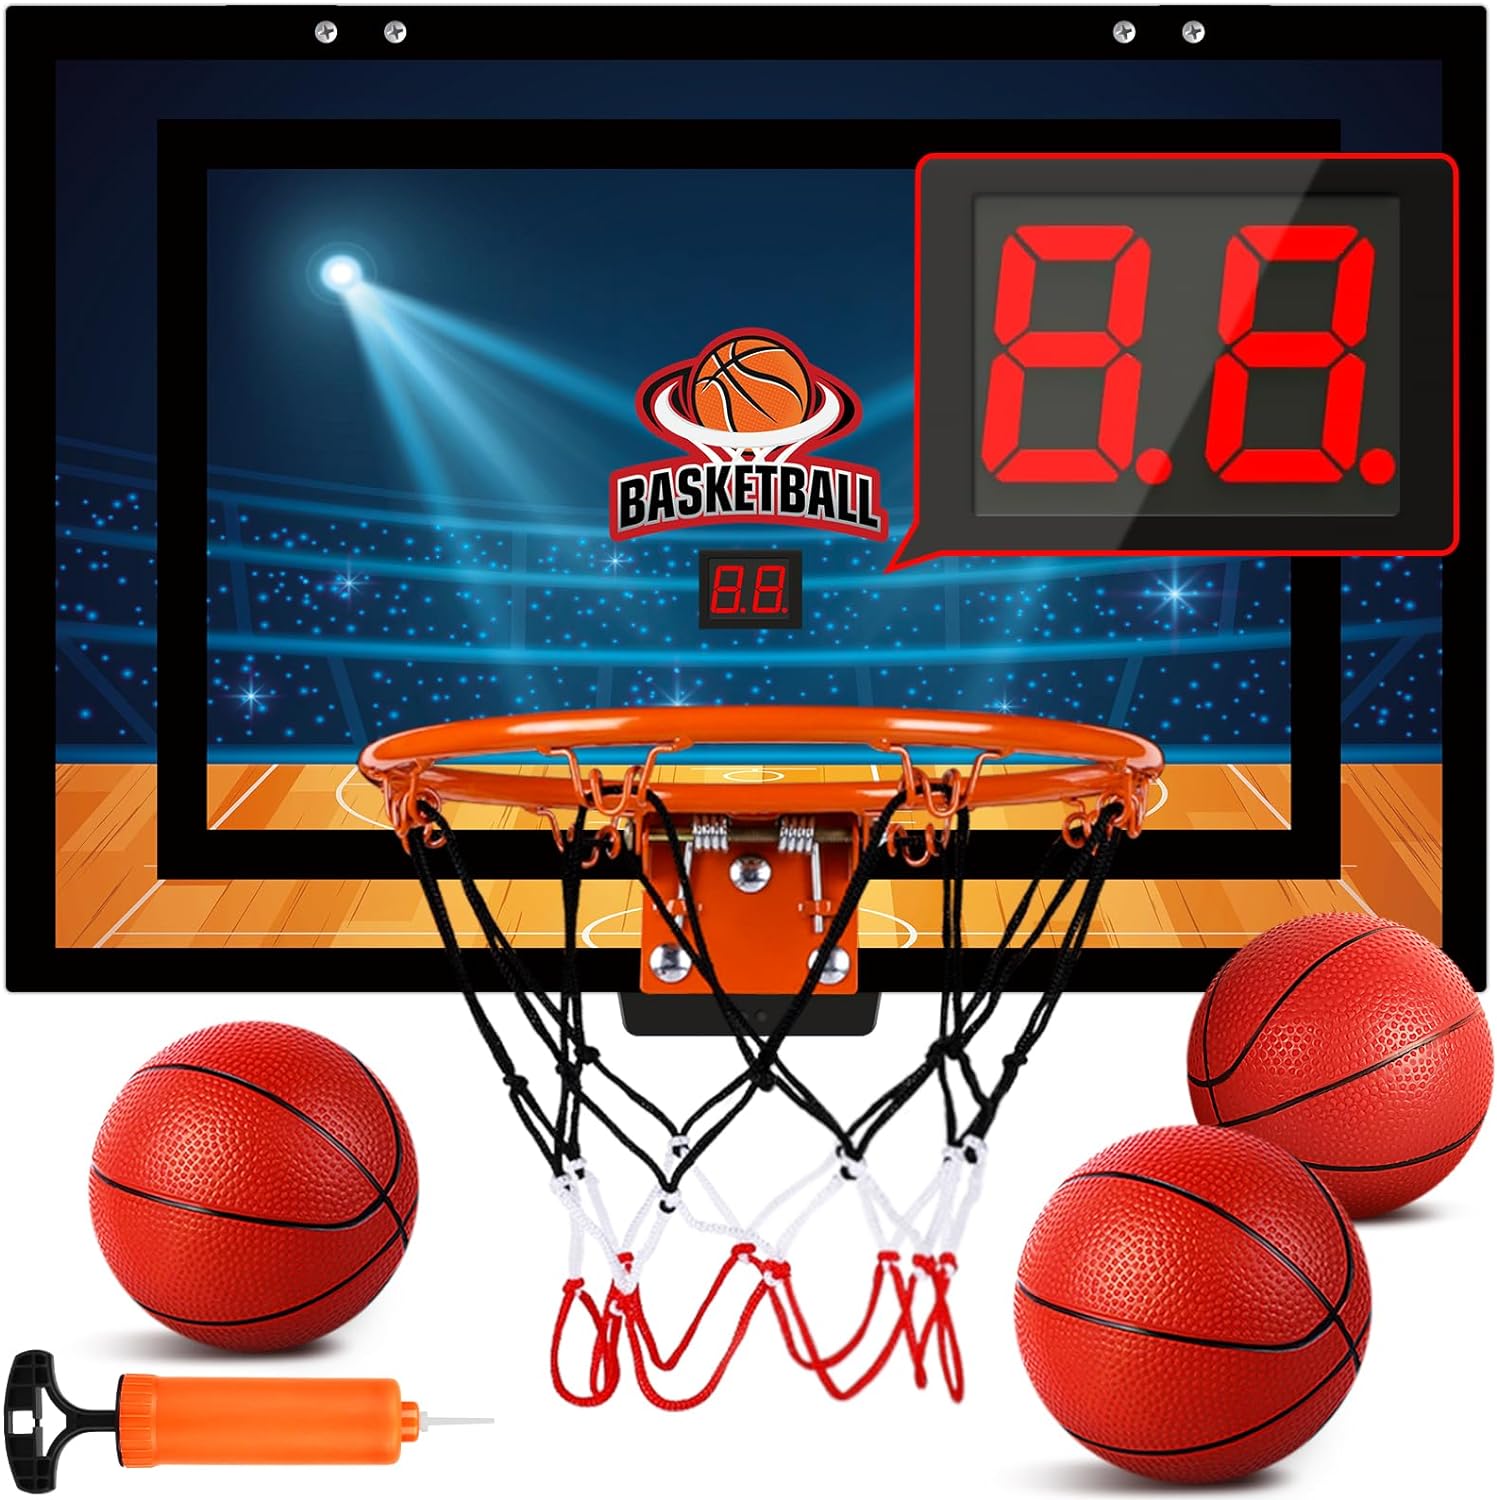 AOKESI Indoor Mini Basketball Hoop Set with 3 Balls for Kids and Adults - Pro Mini Basketball Hoop for Door with Complete Basketball Accessories Perfect Christmas Birthday Gifts for Kids Boys Teens